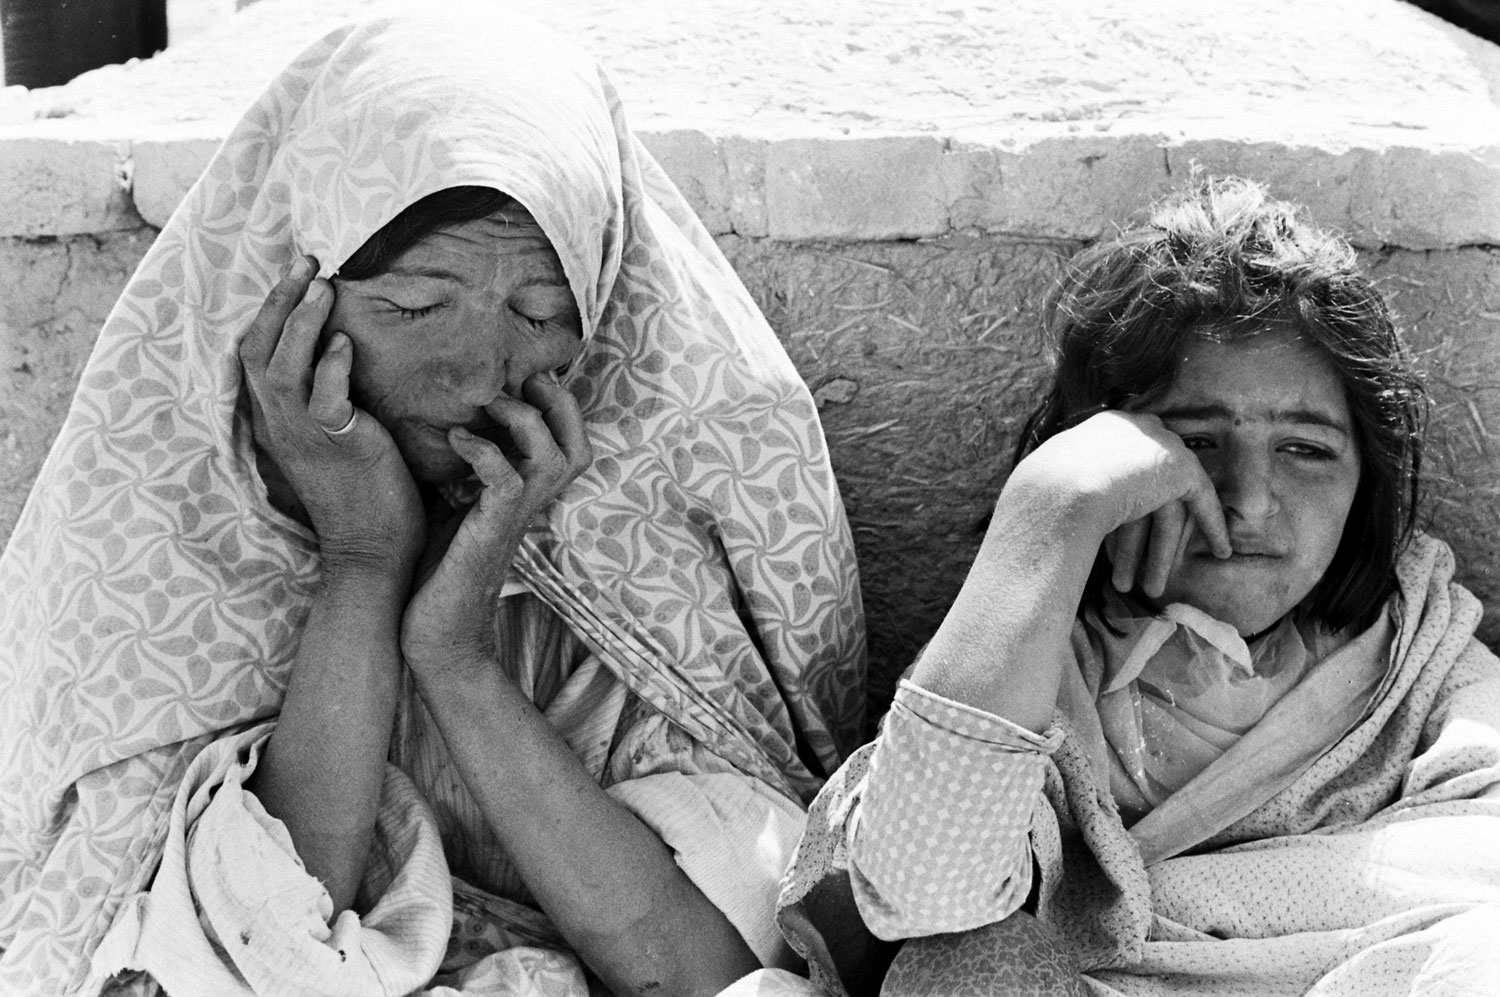 Aftermath of a September 1962 earthquake in Iran.